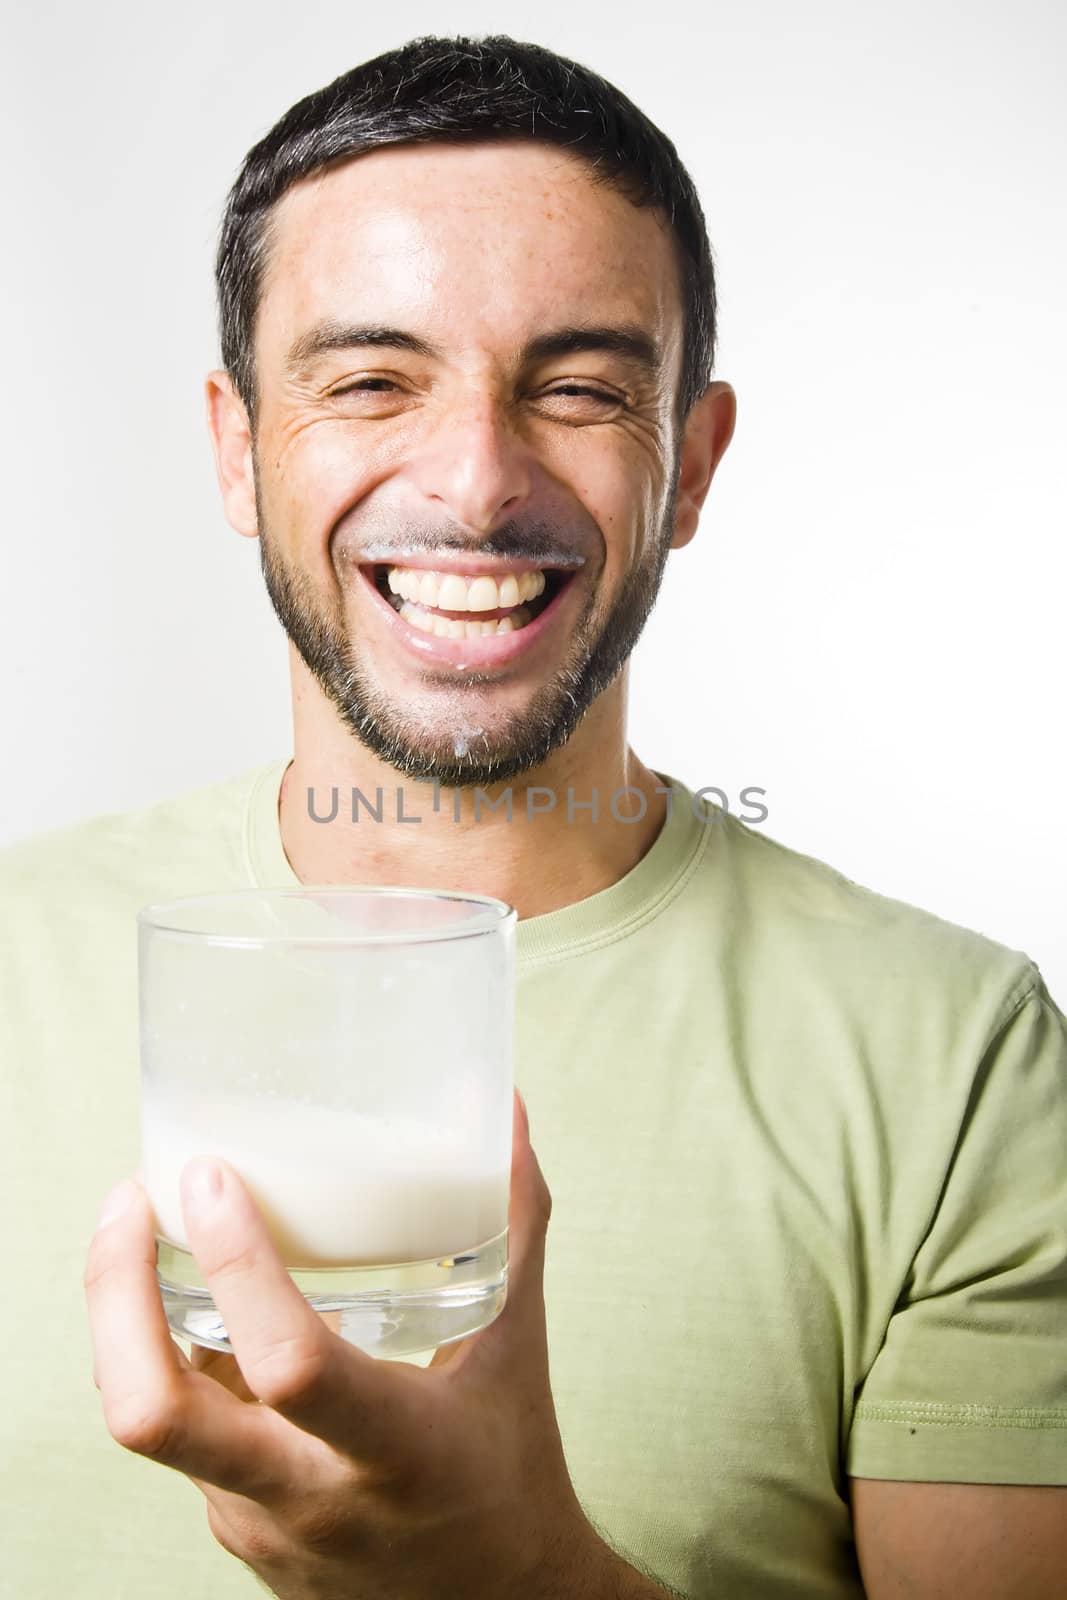 Healthy Young Handsome Man with Beard drinking Milk isolated on White Background